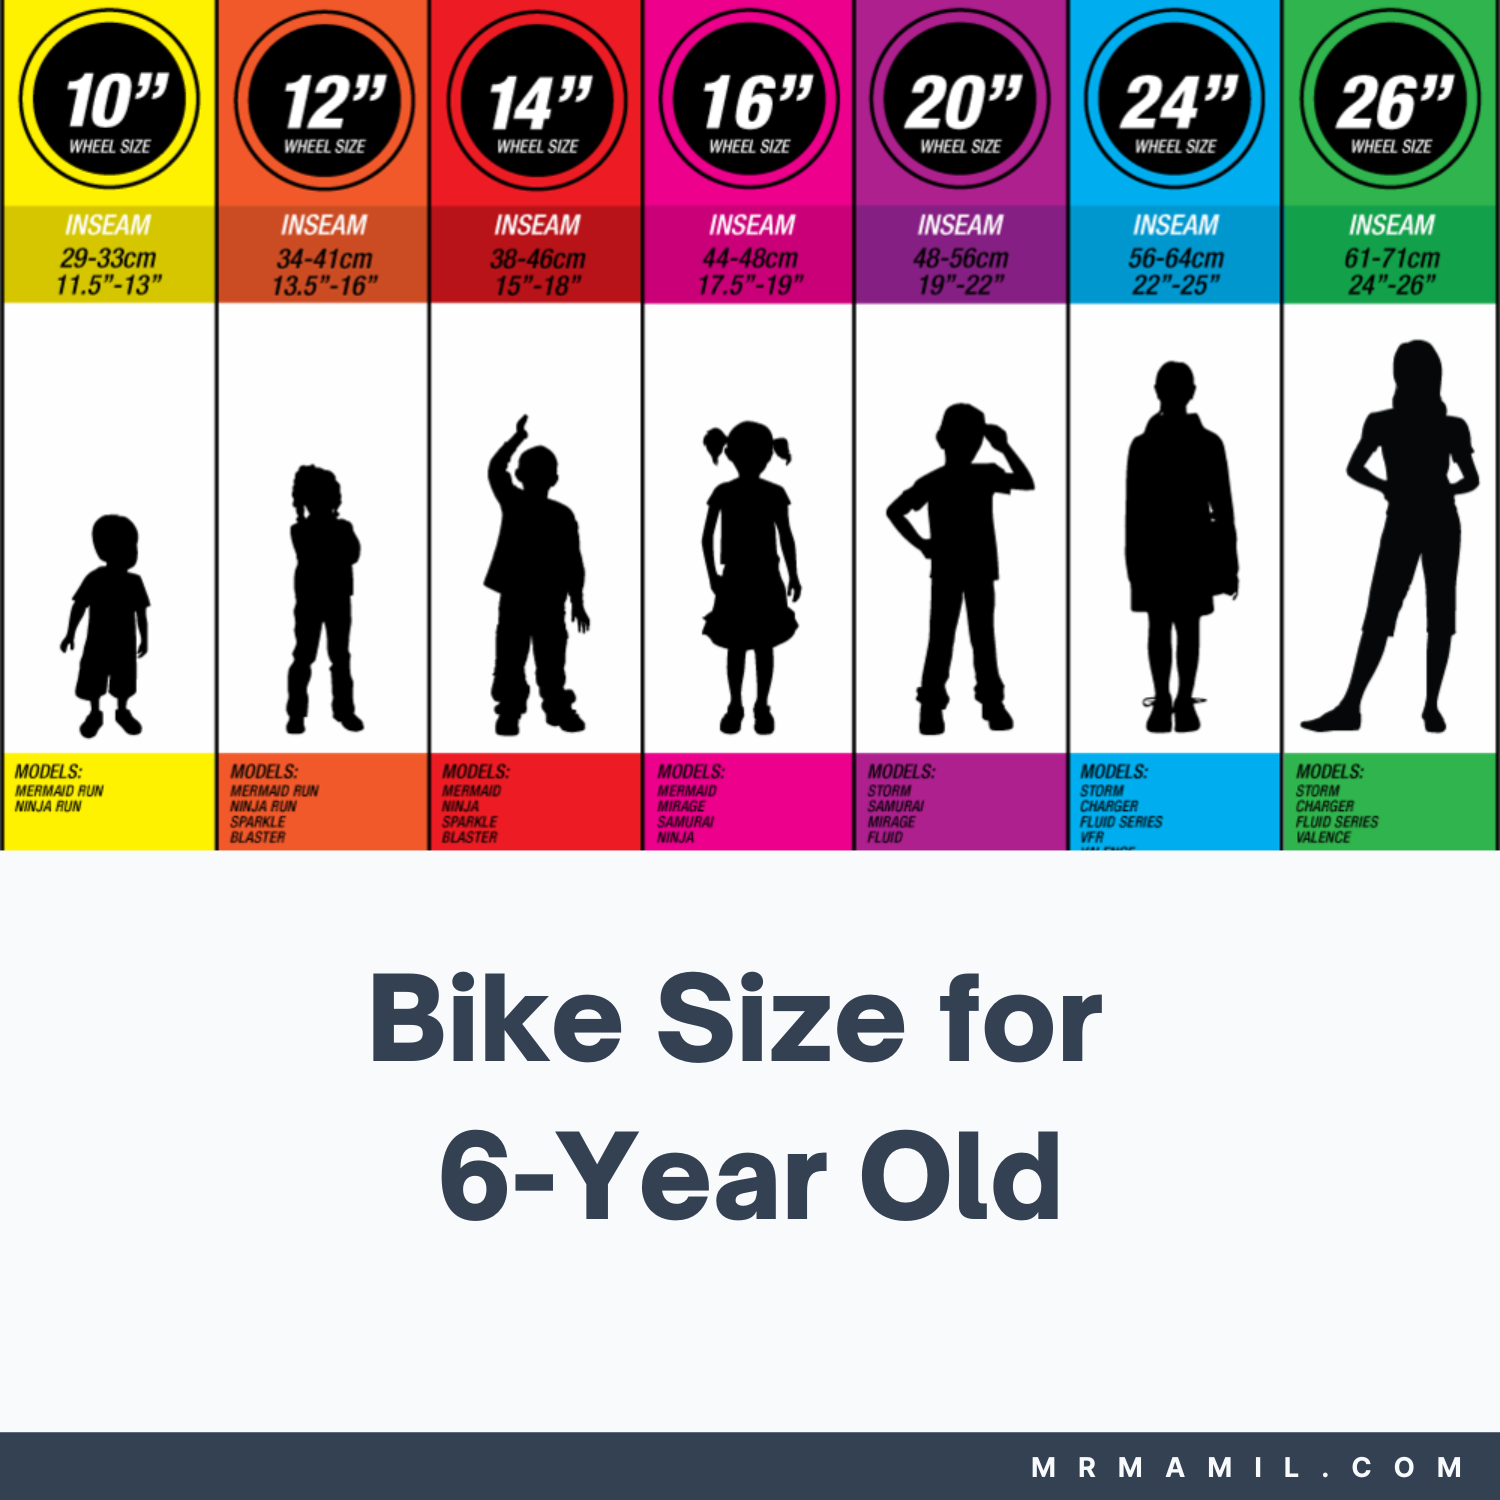 Bike Size for 6 Year Old